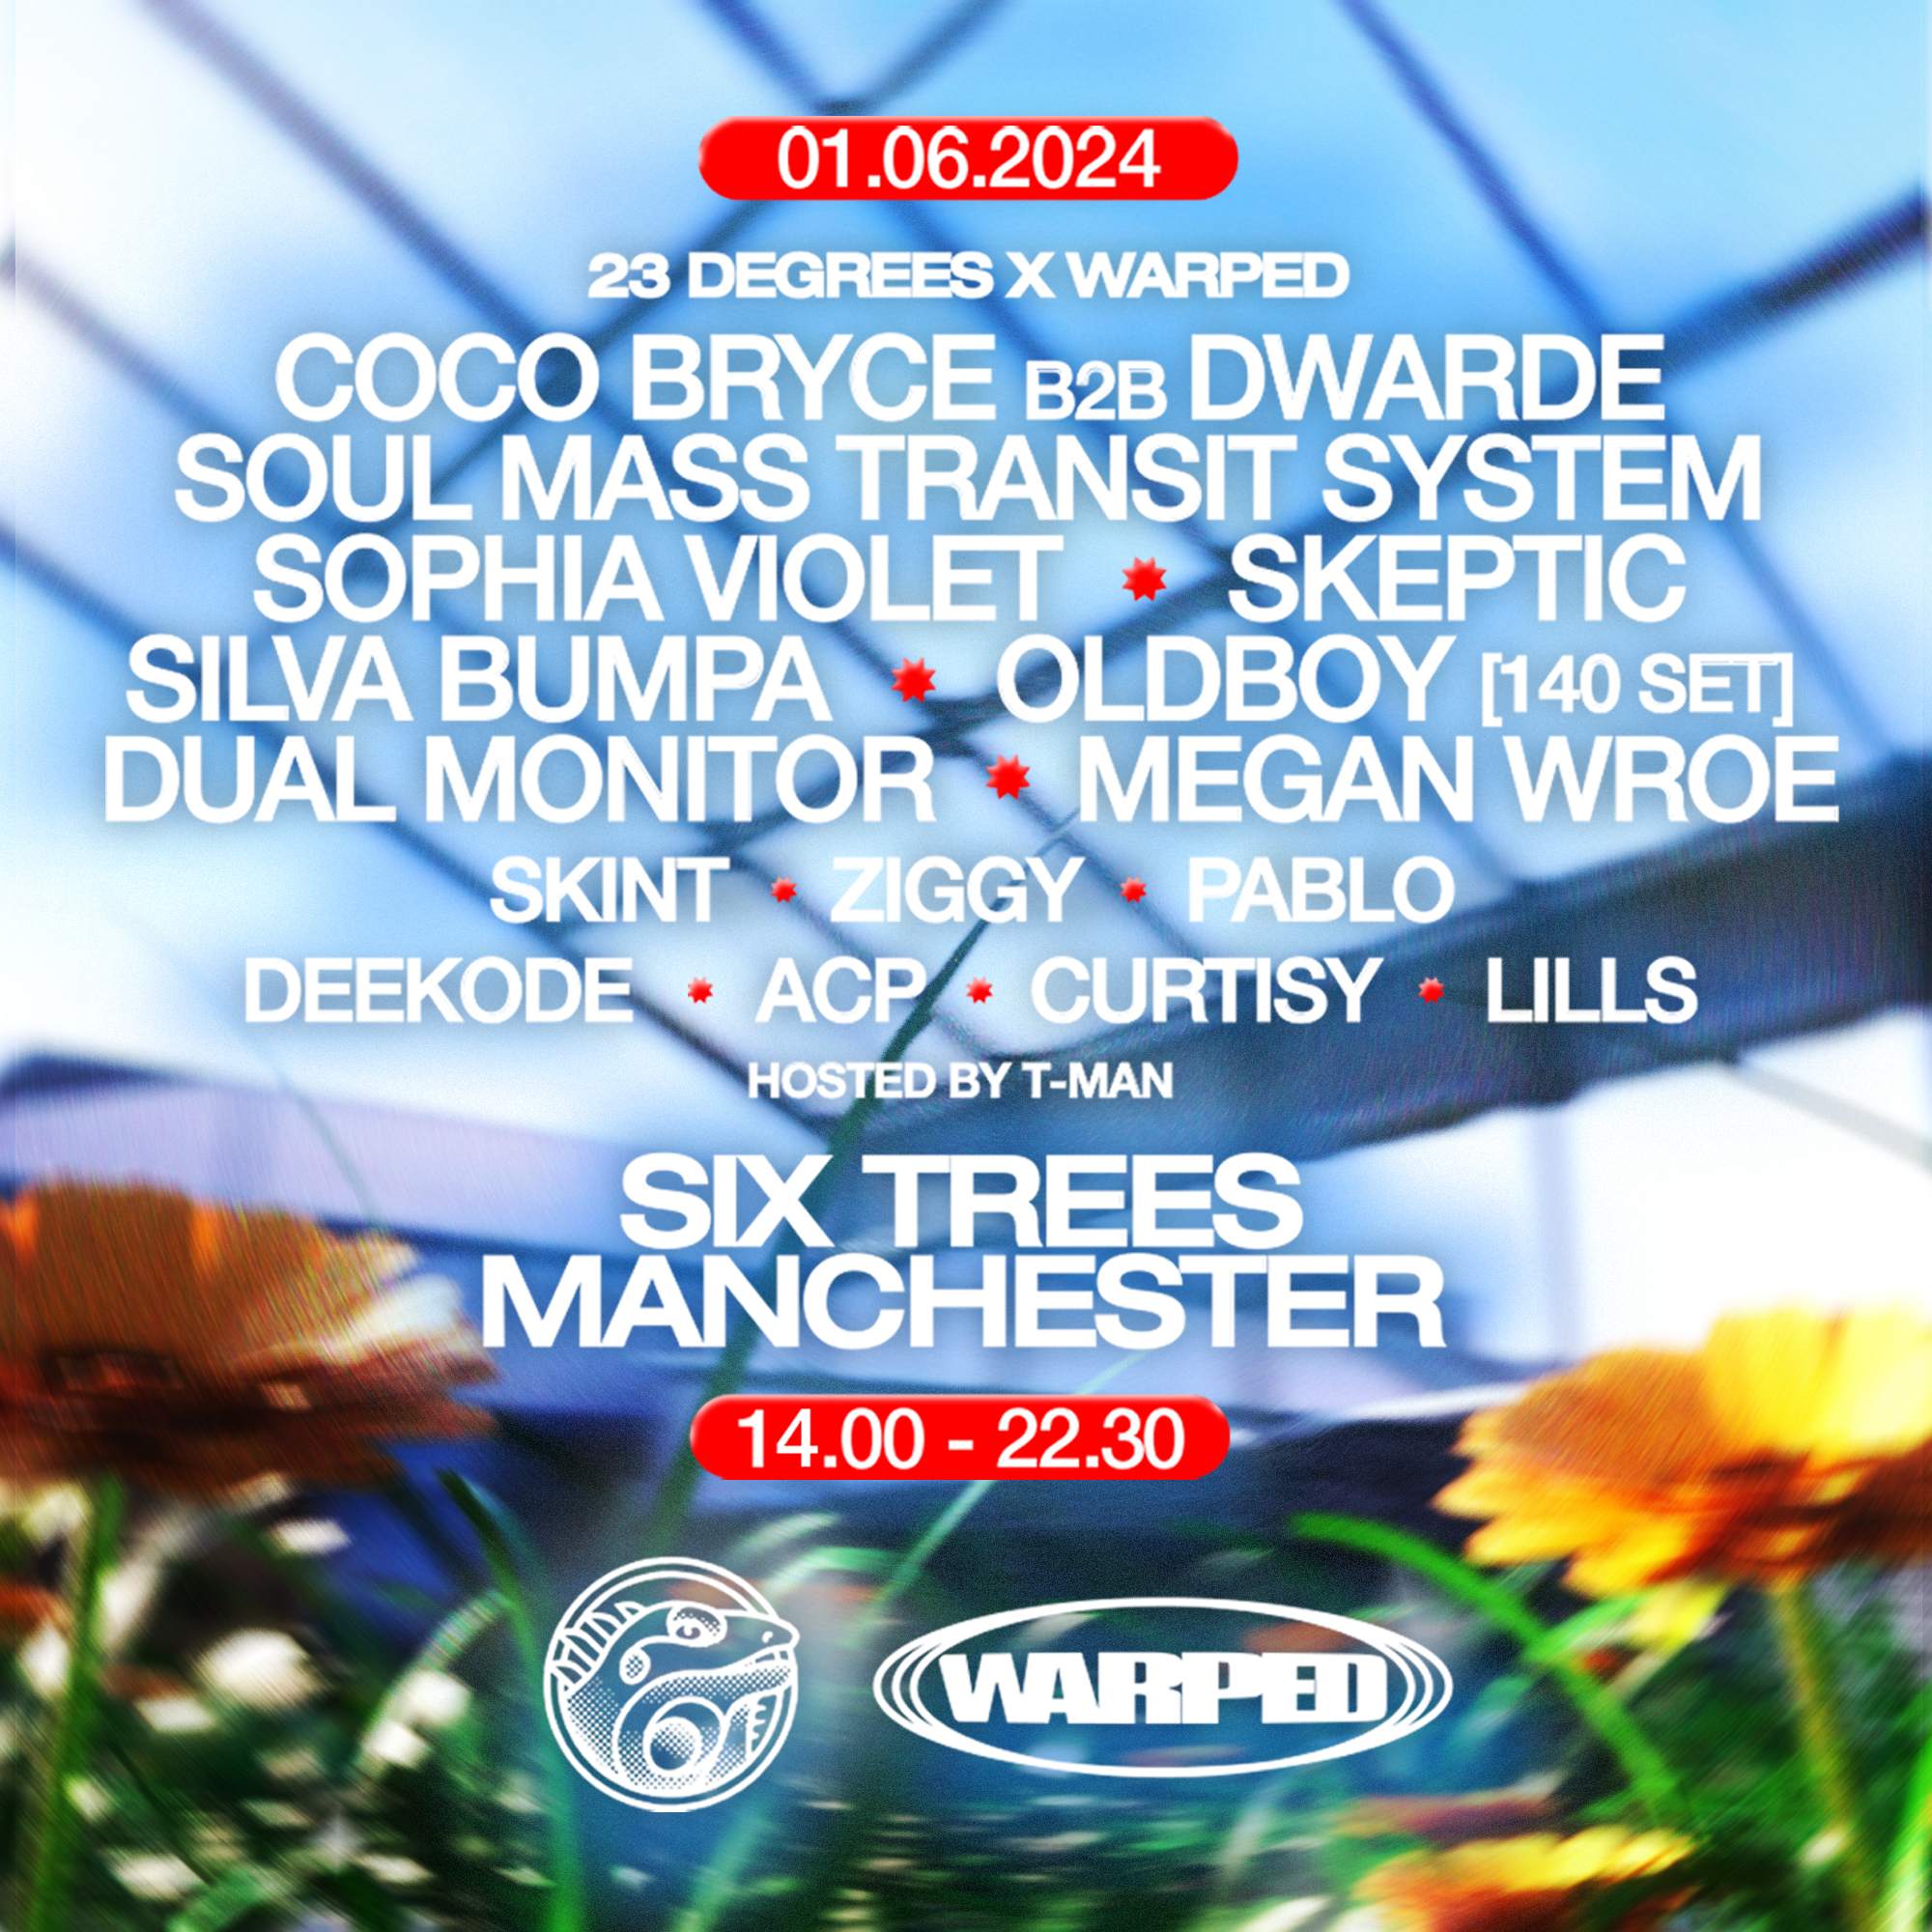 23 Degrees x Warped Day Party: Coco Bryce b2b Dwarde, Soul Mass Transit System, Skeptic - フライヤー表